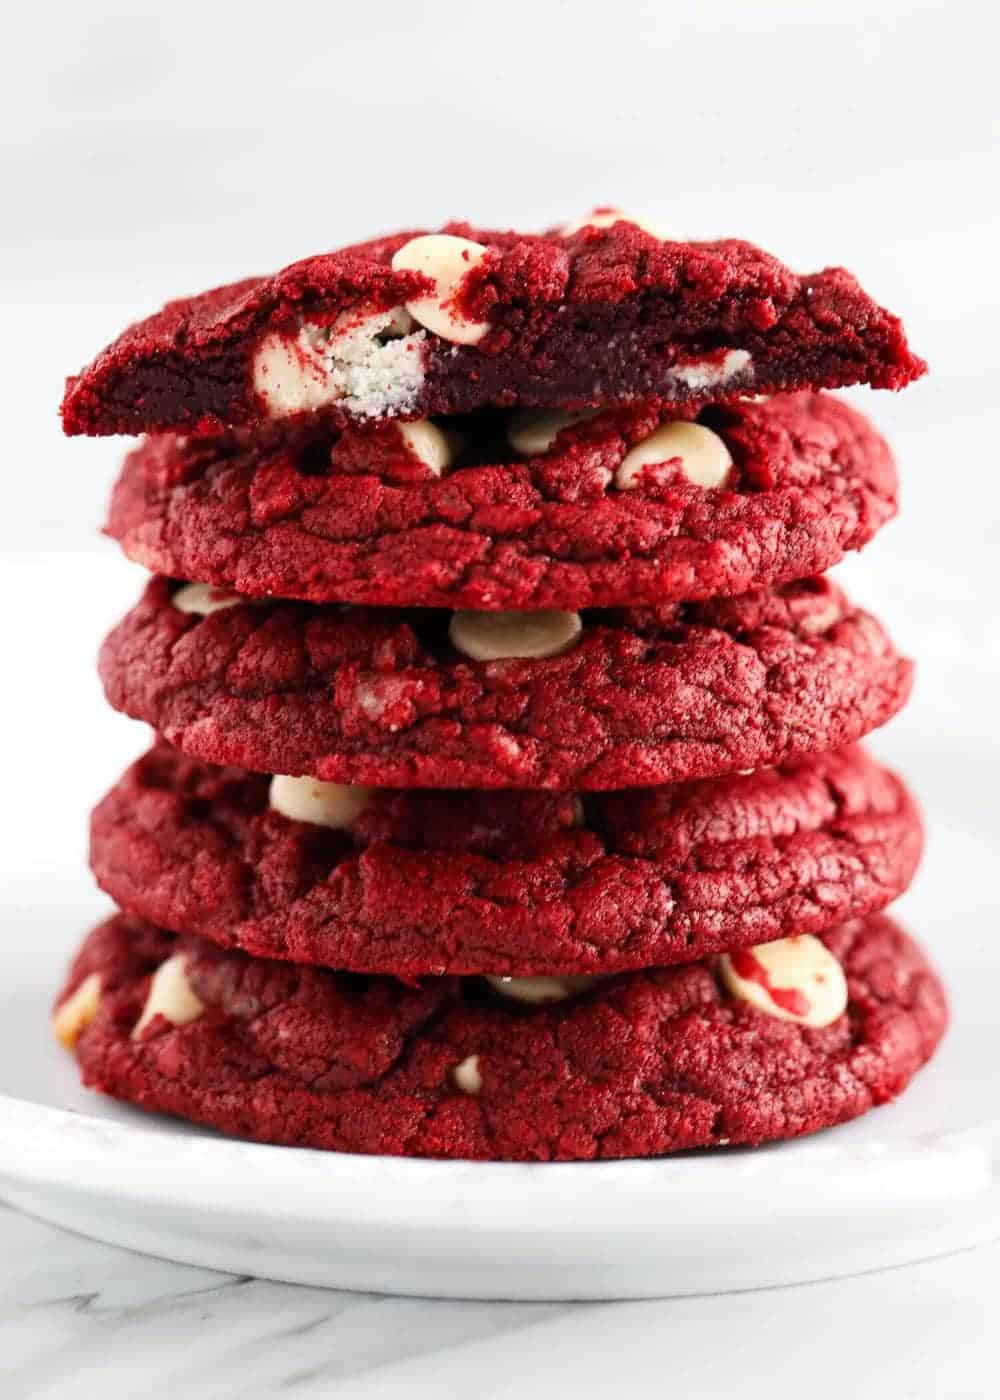 Stack of red velvet cake mix cookies on plate.